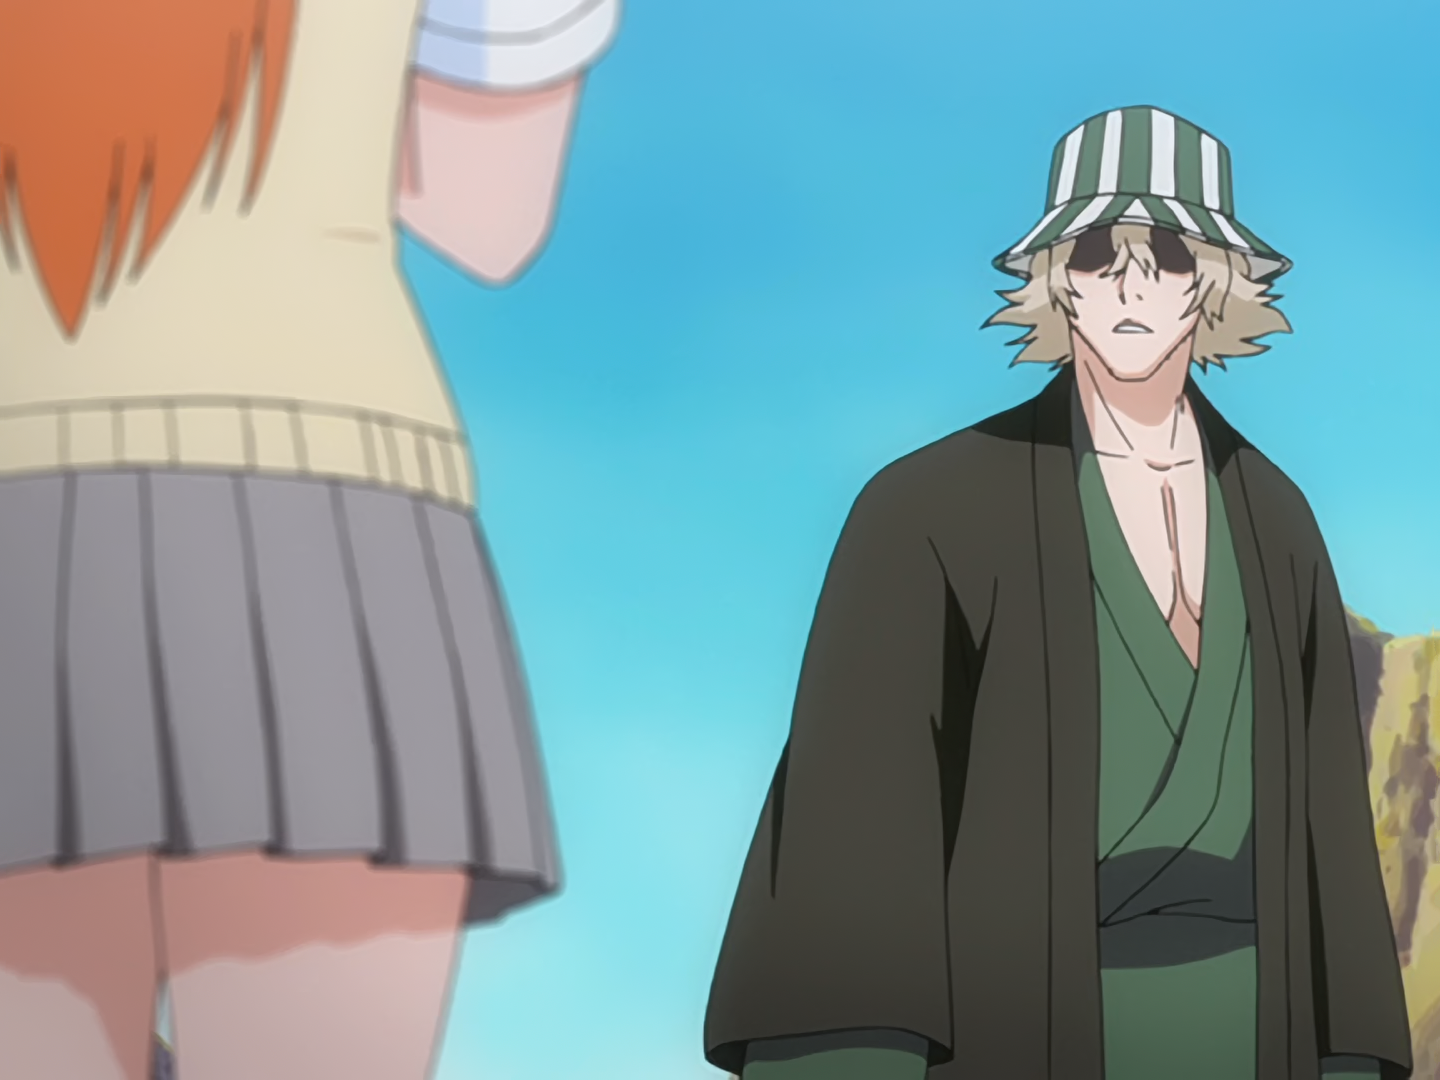 Urahara's Decision, Orihime's Thoughts! Bleach Episode 127 & 128 REACTION 